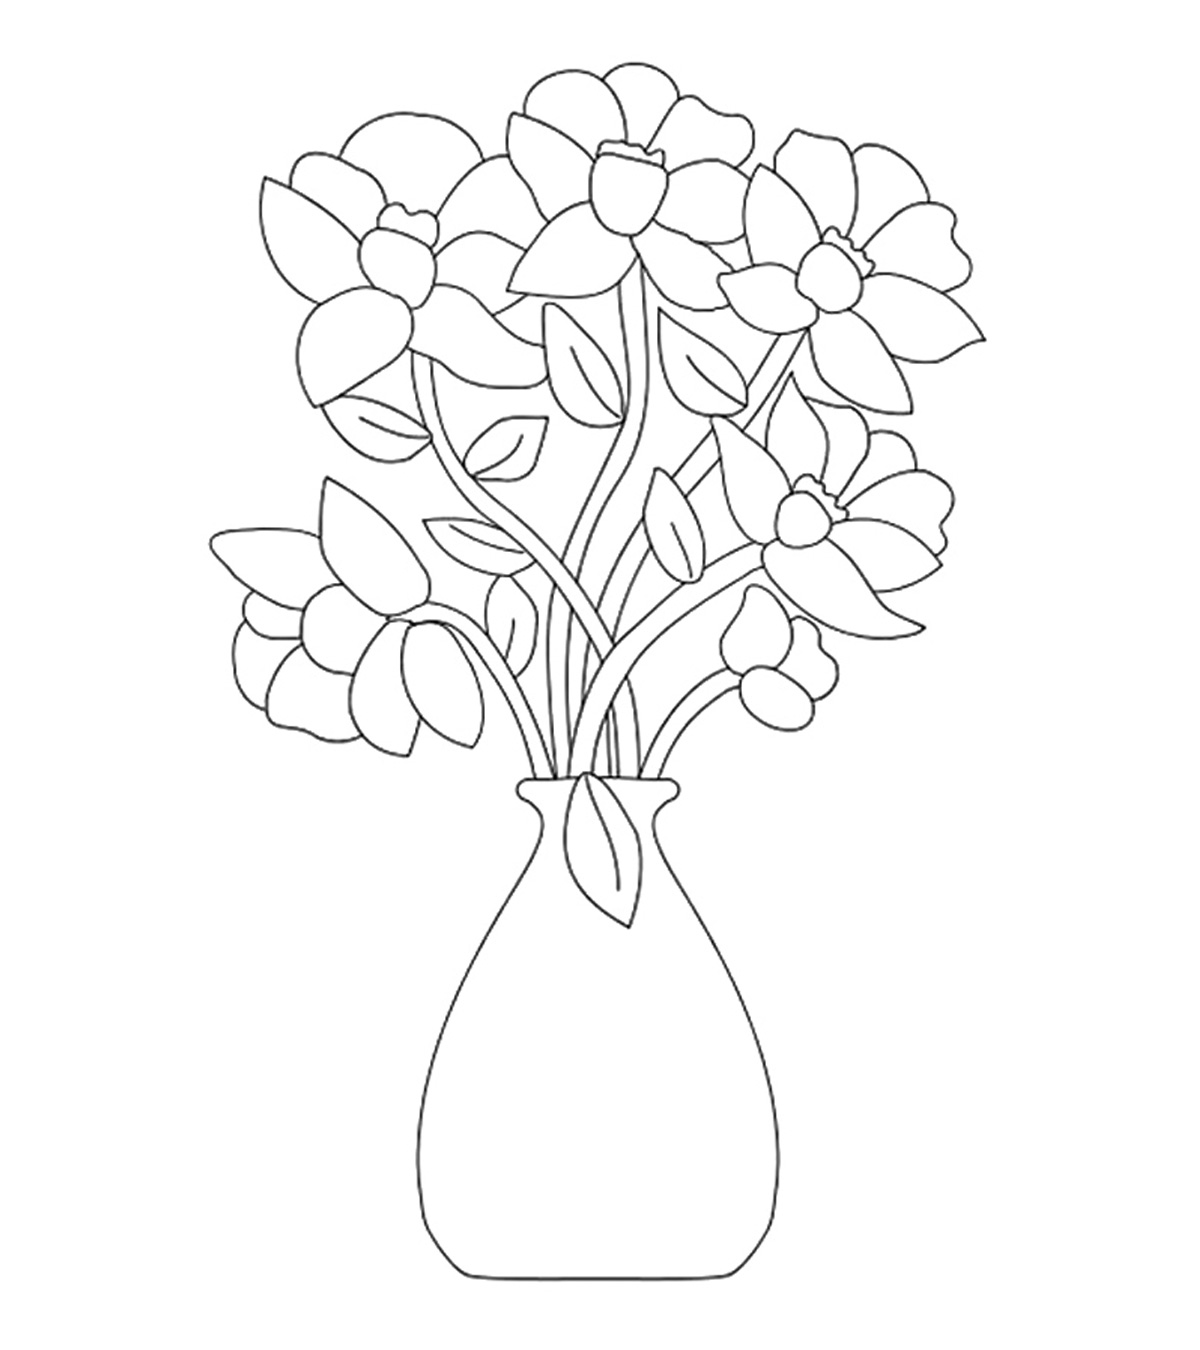 47 Beautiful Flowers Coloring Pages Your Toddler Will Love To Color_image